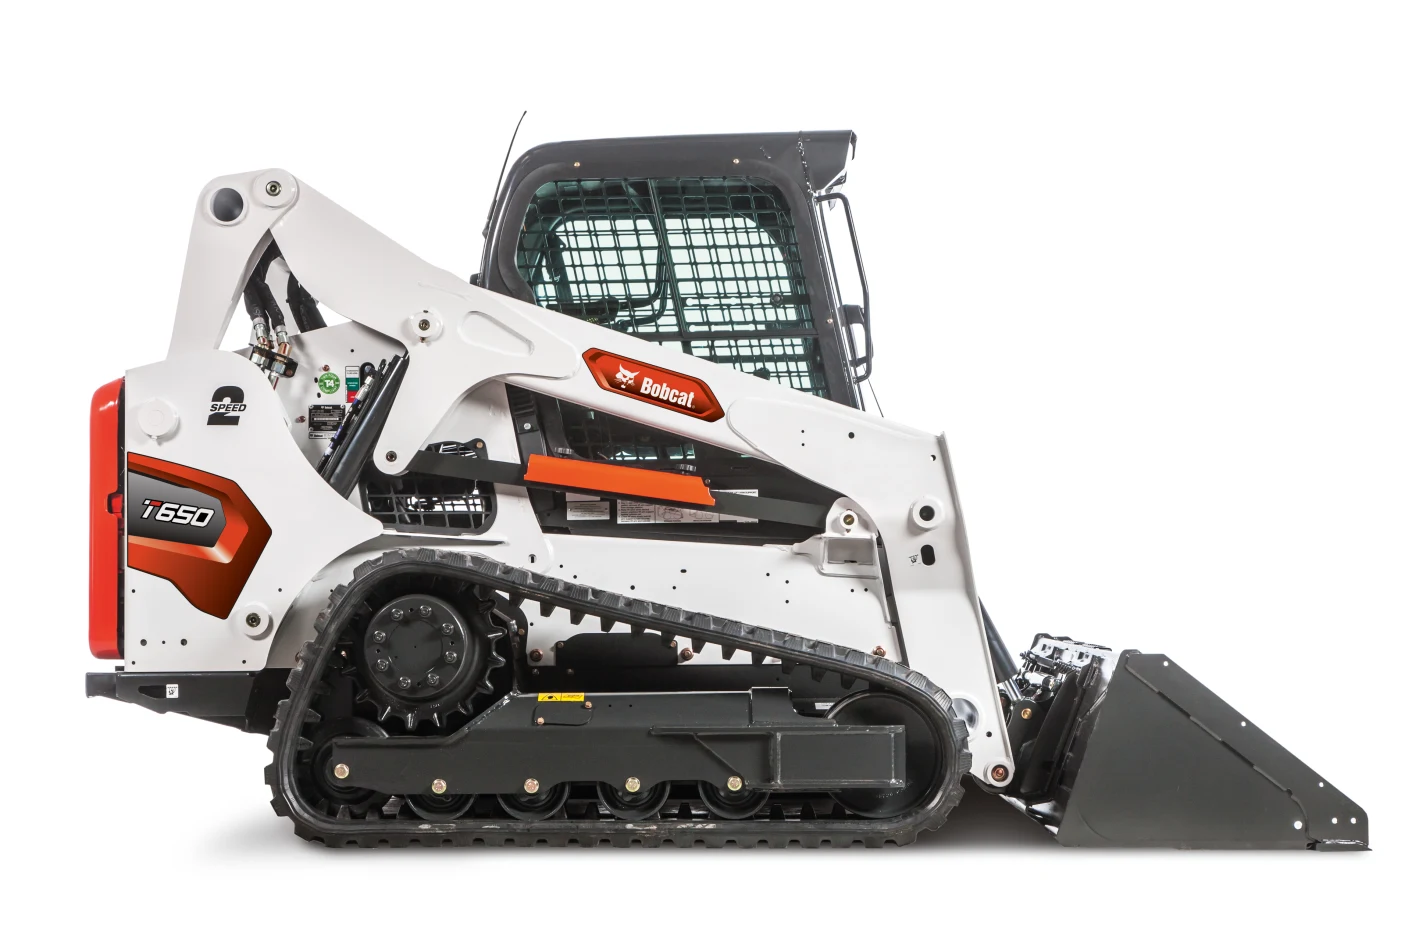 Browse Specs and more for the Bobcat T650 Compact Track Loader - KC Bobcat